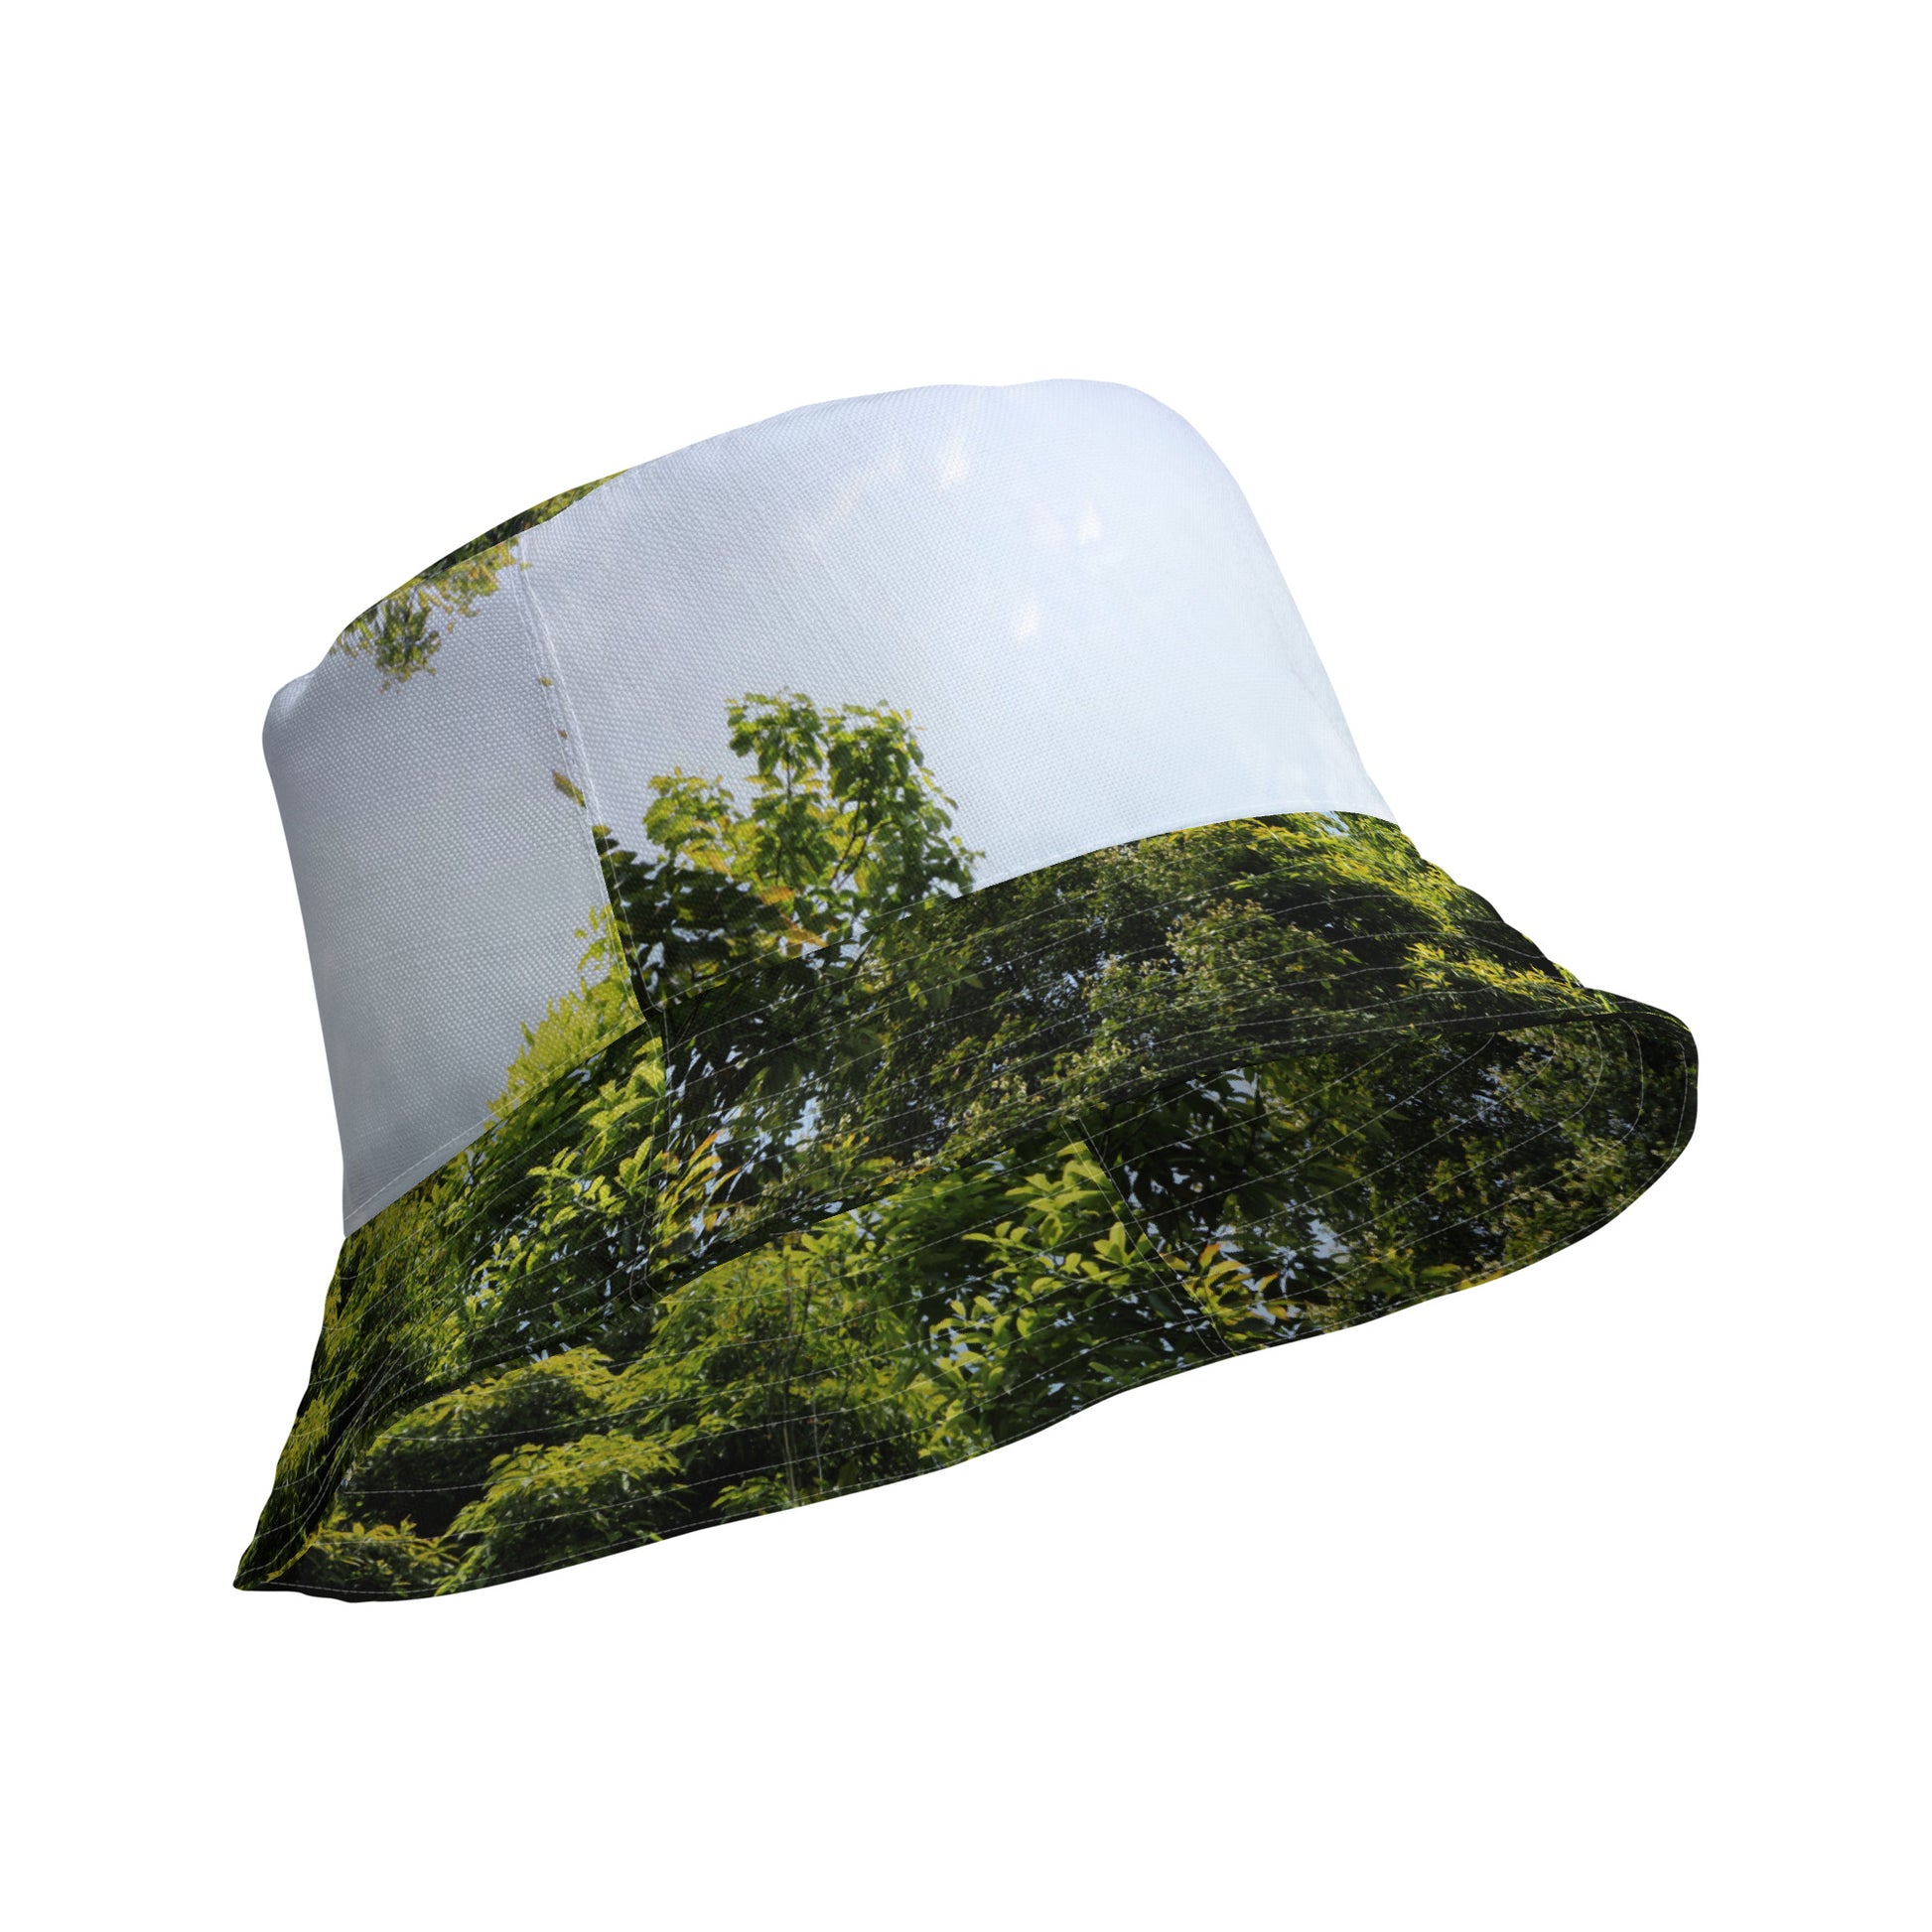 Reversible bucket hat, men, women, fashion style, outfits, gift